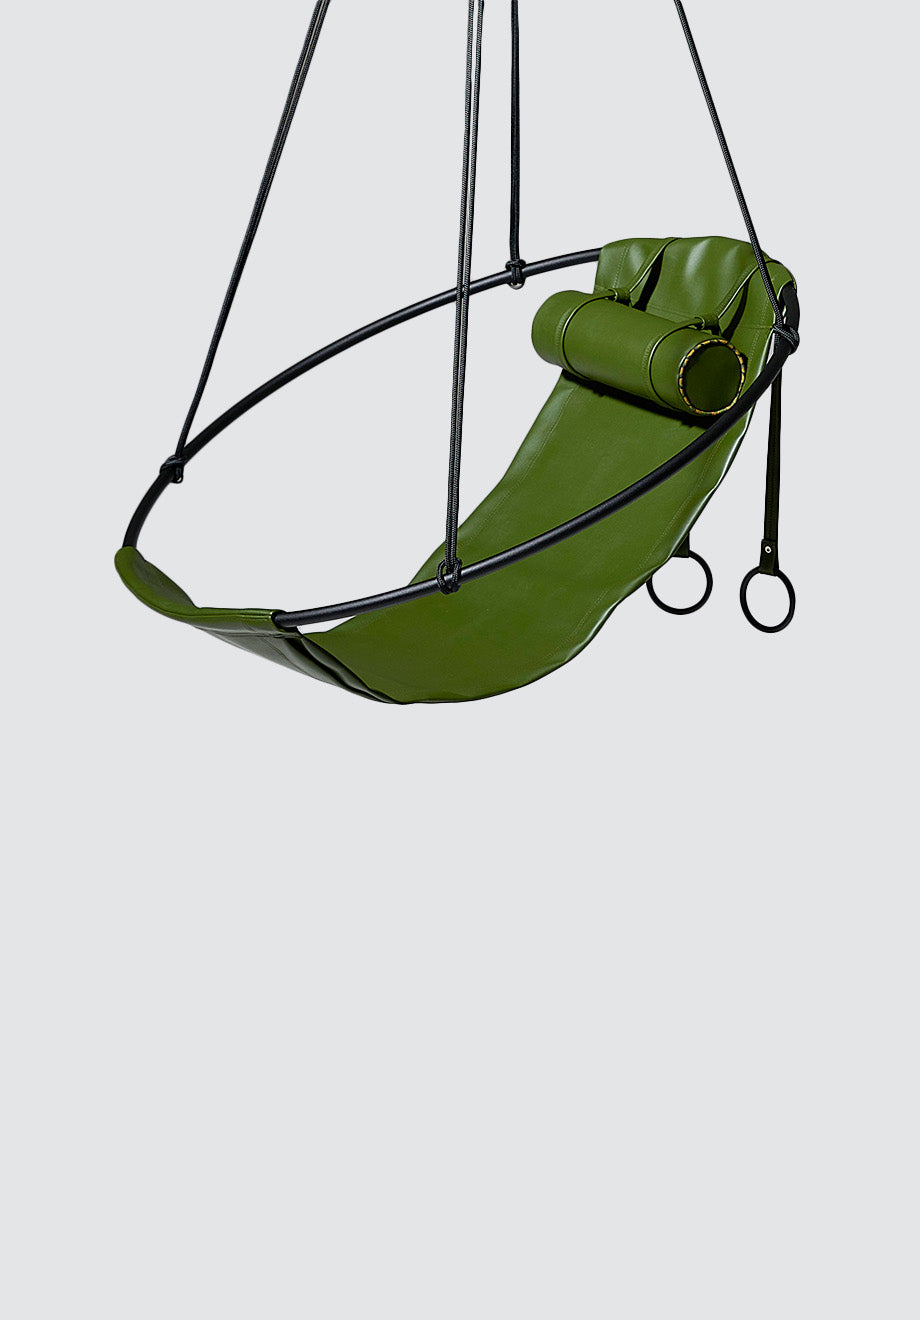 Sling Eco Vegan Cactus Leather Hanging Chair